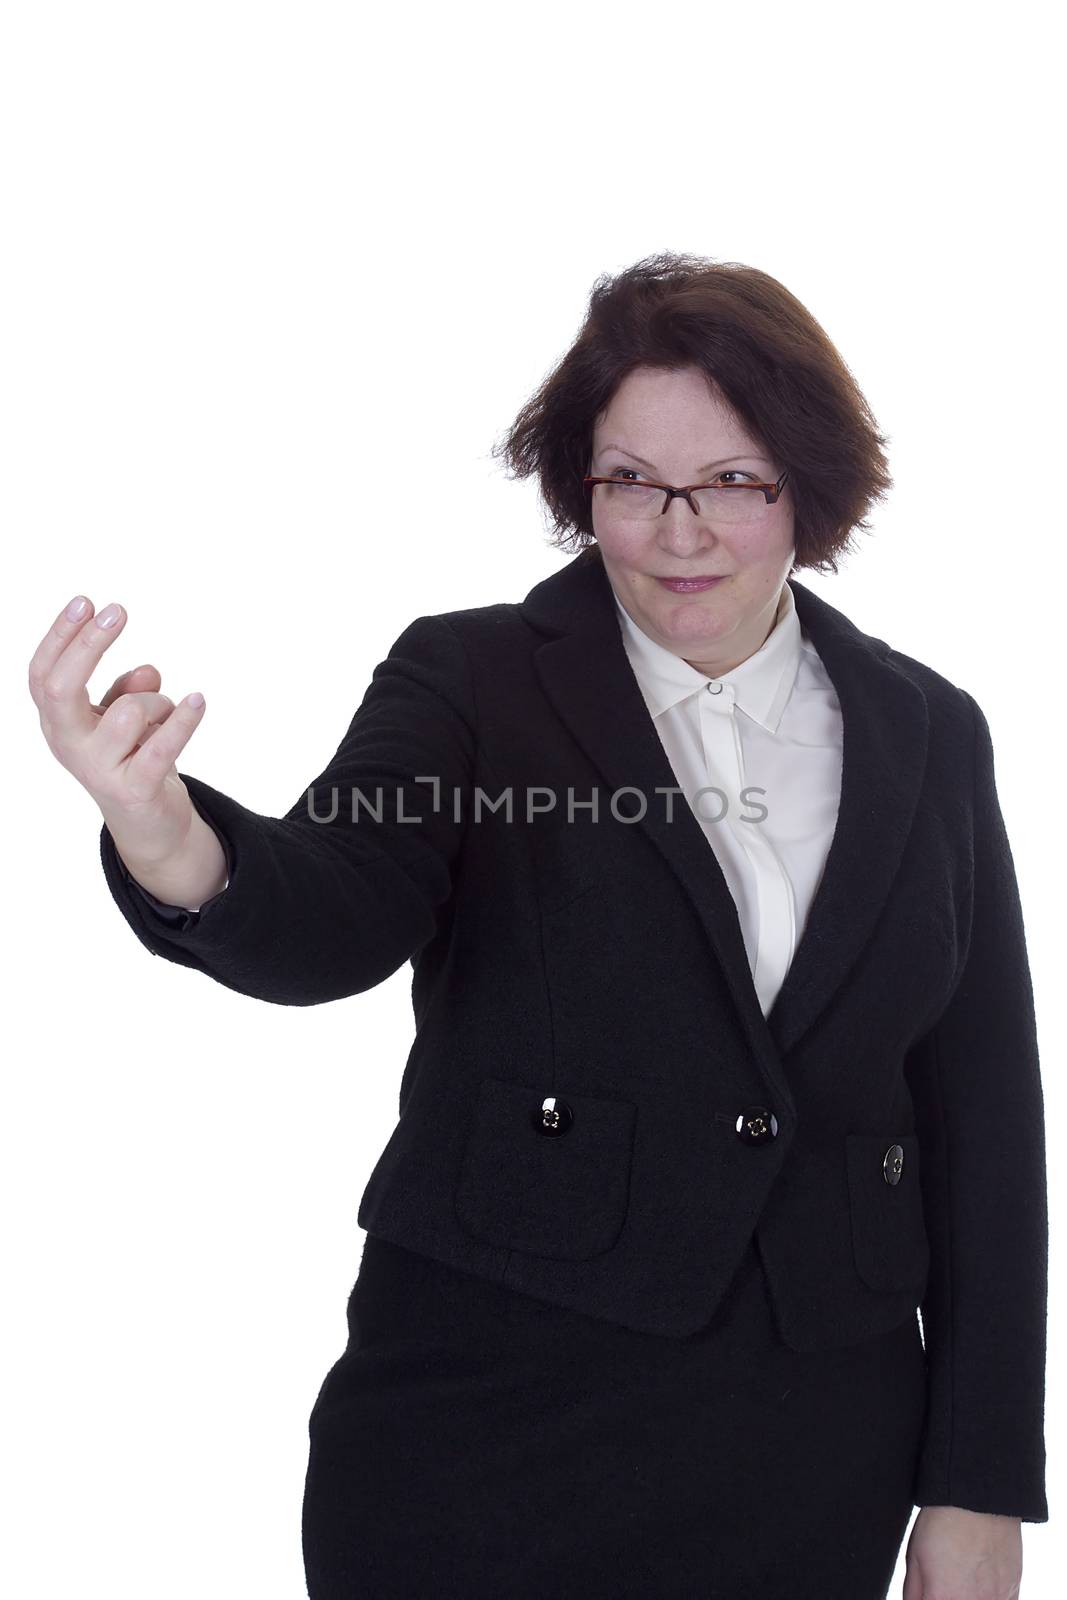 Business Senior Woman over a white background